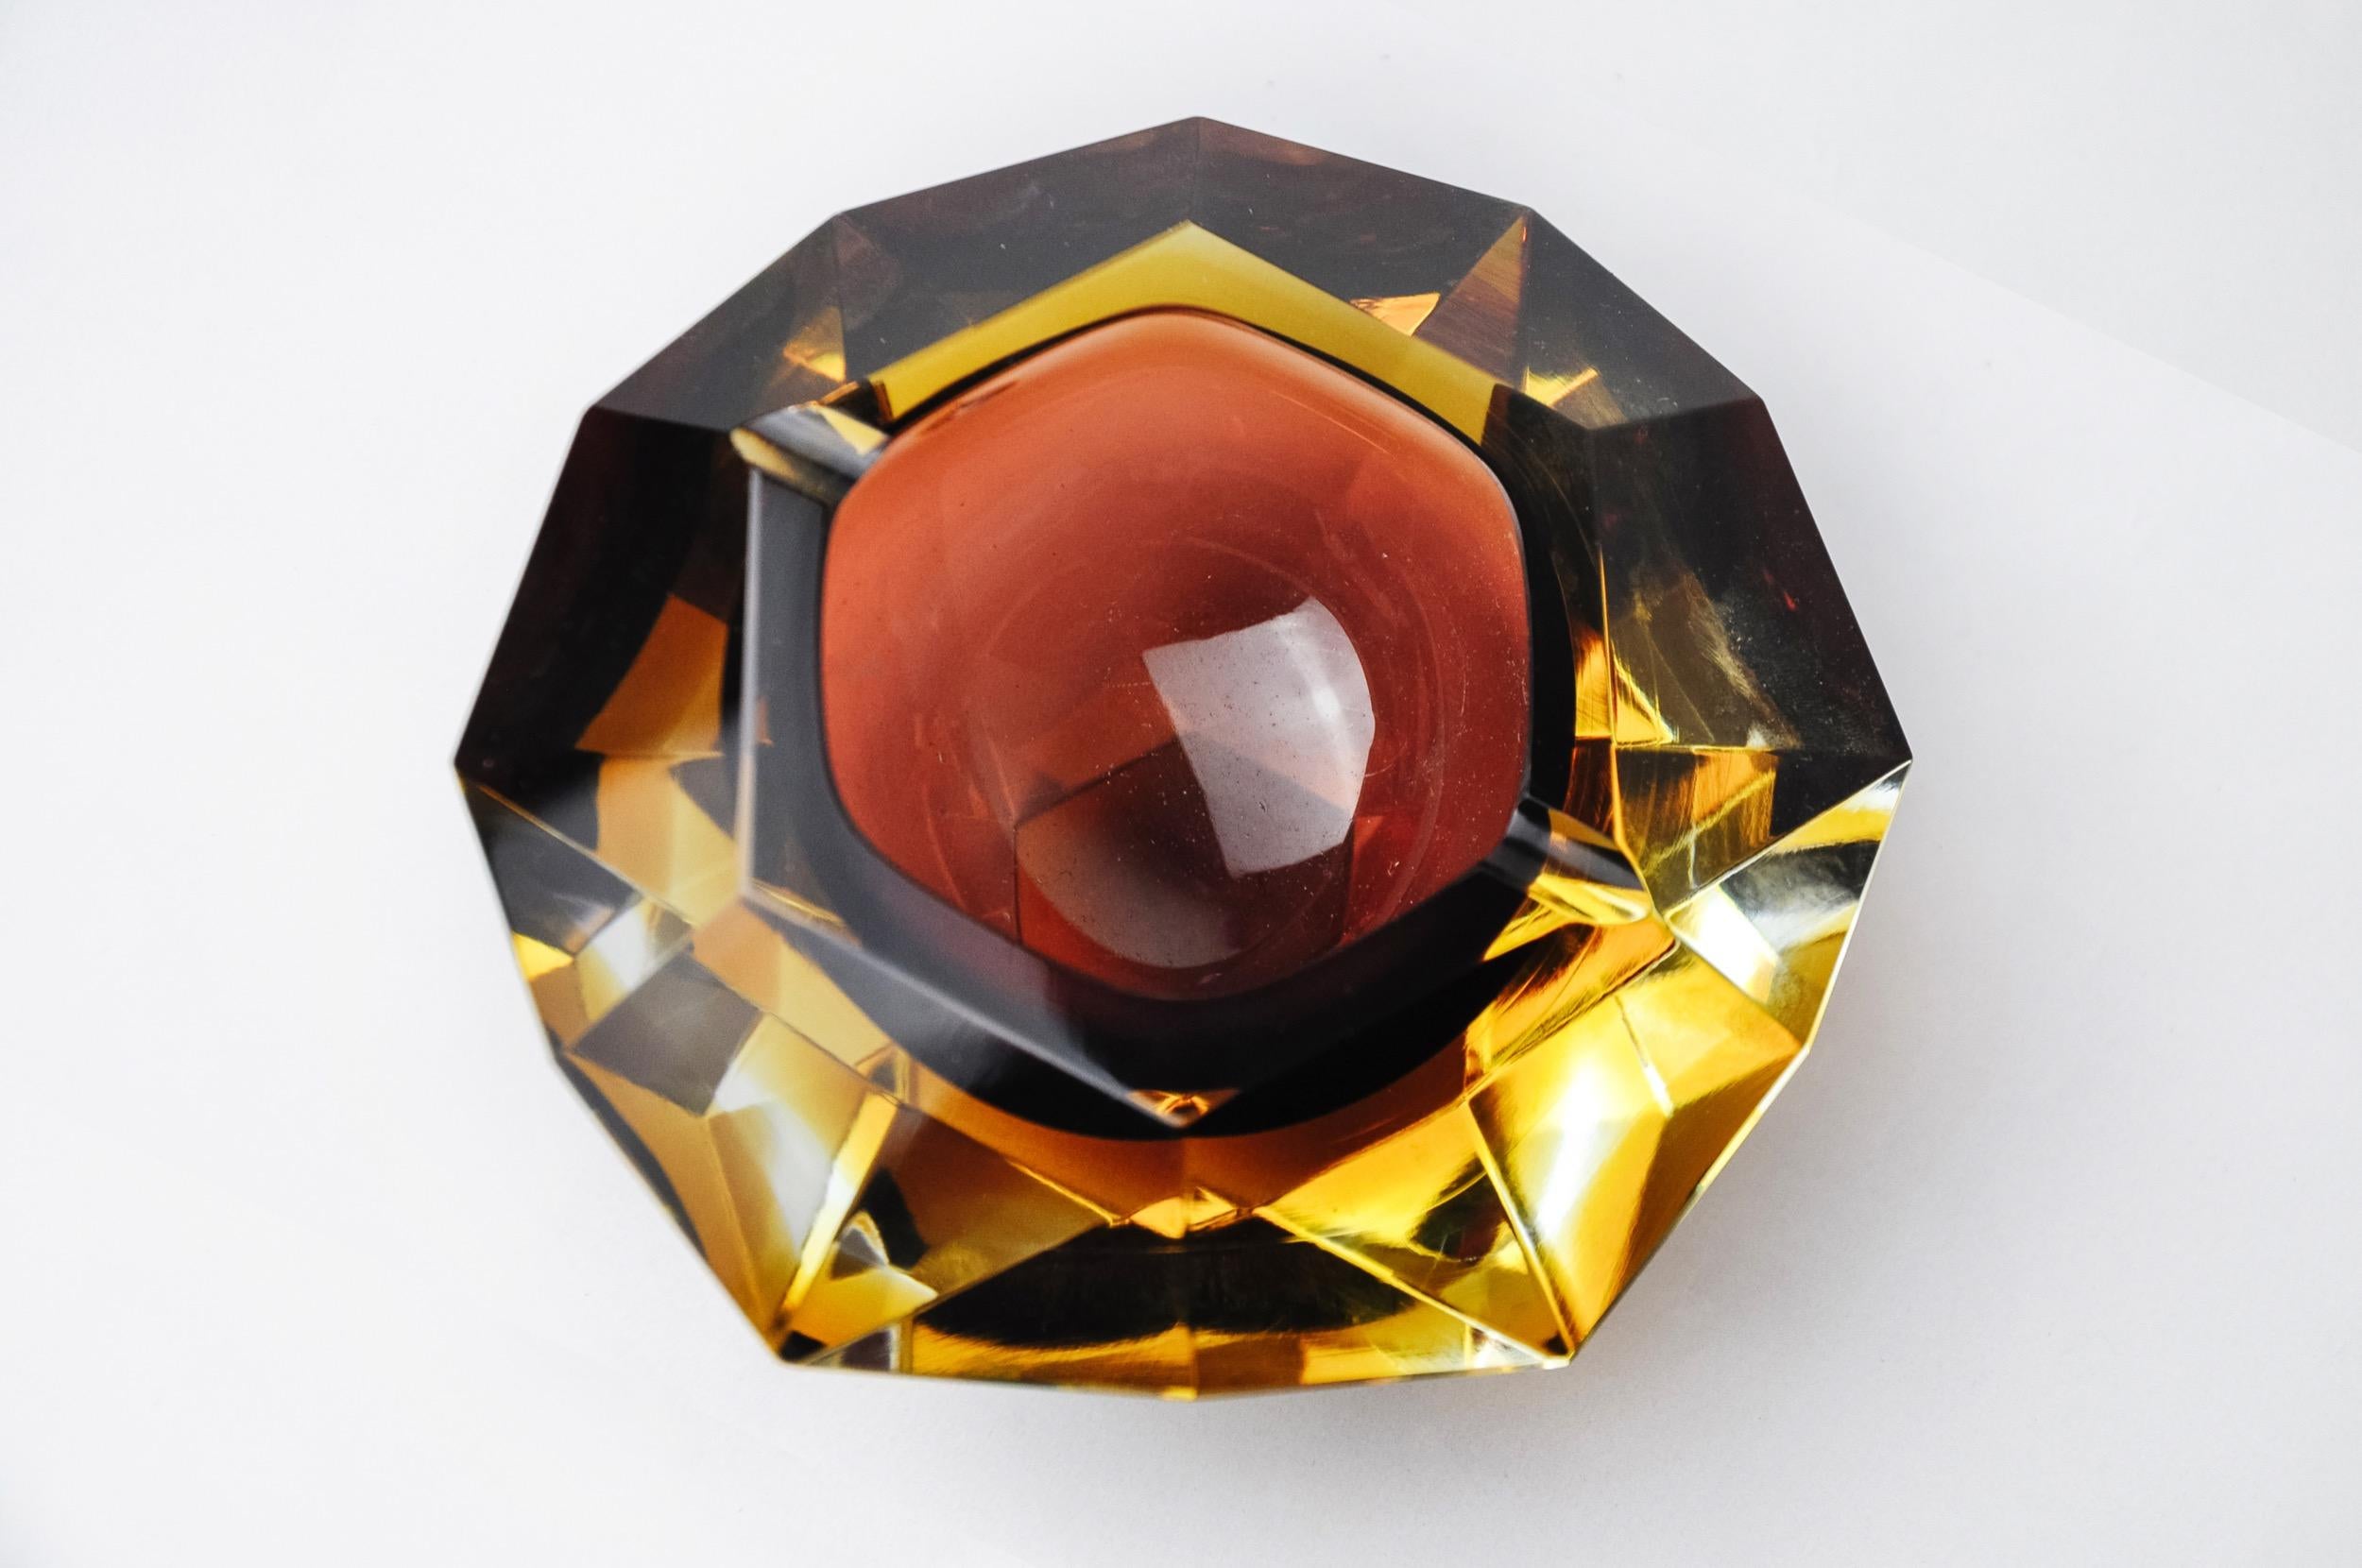 Superb and rare brown and yellow faceted Sommerso ashtray designed and manufactured for Seguso in Murano in the 1970s. Handcrafted faceted glass using the 